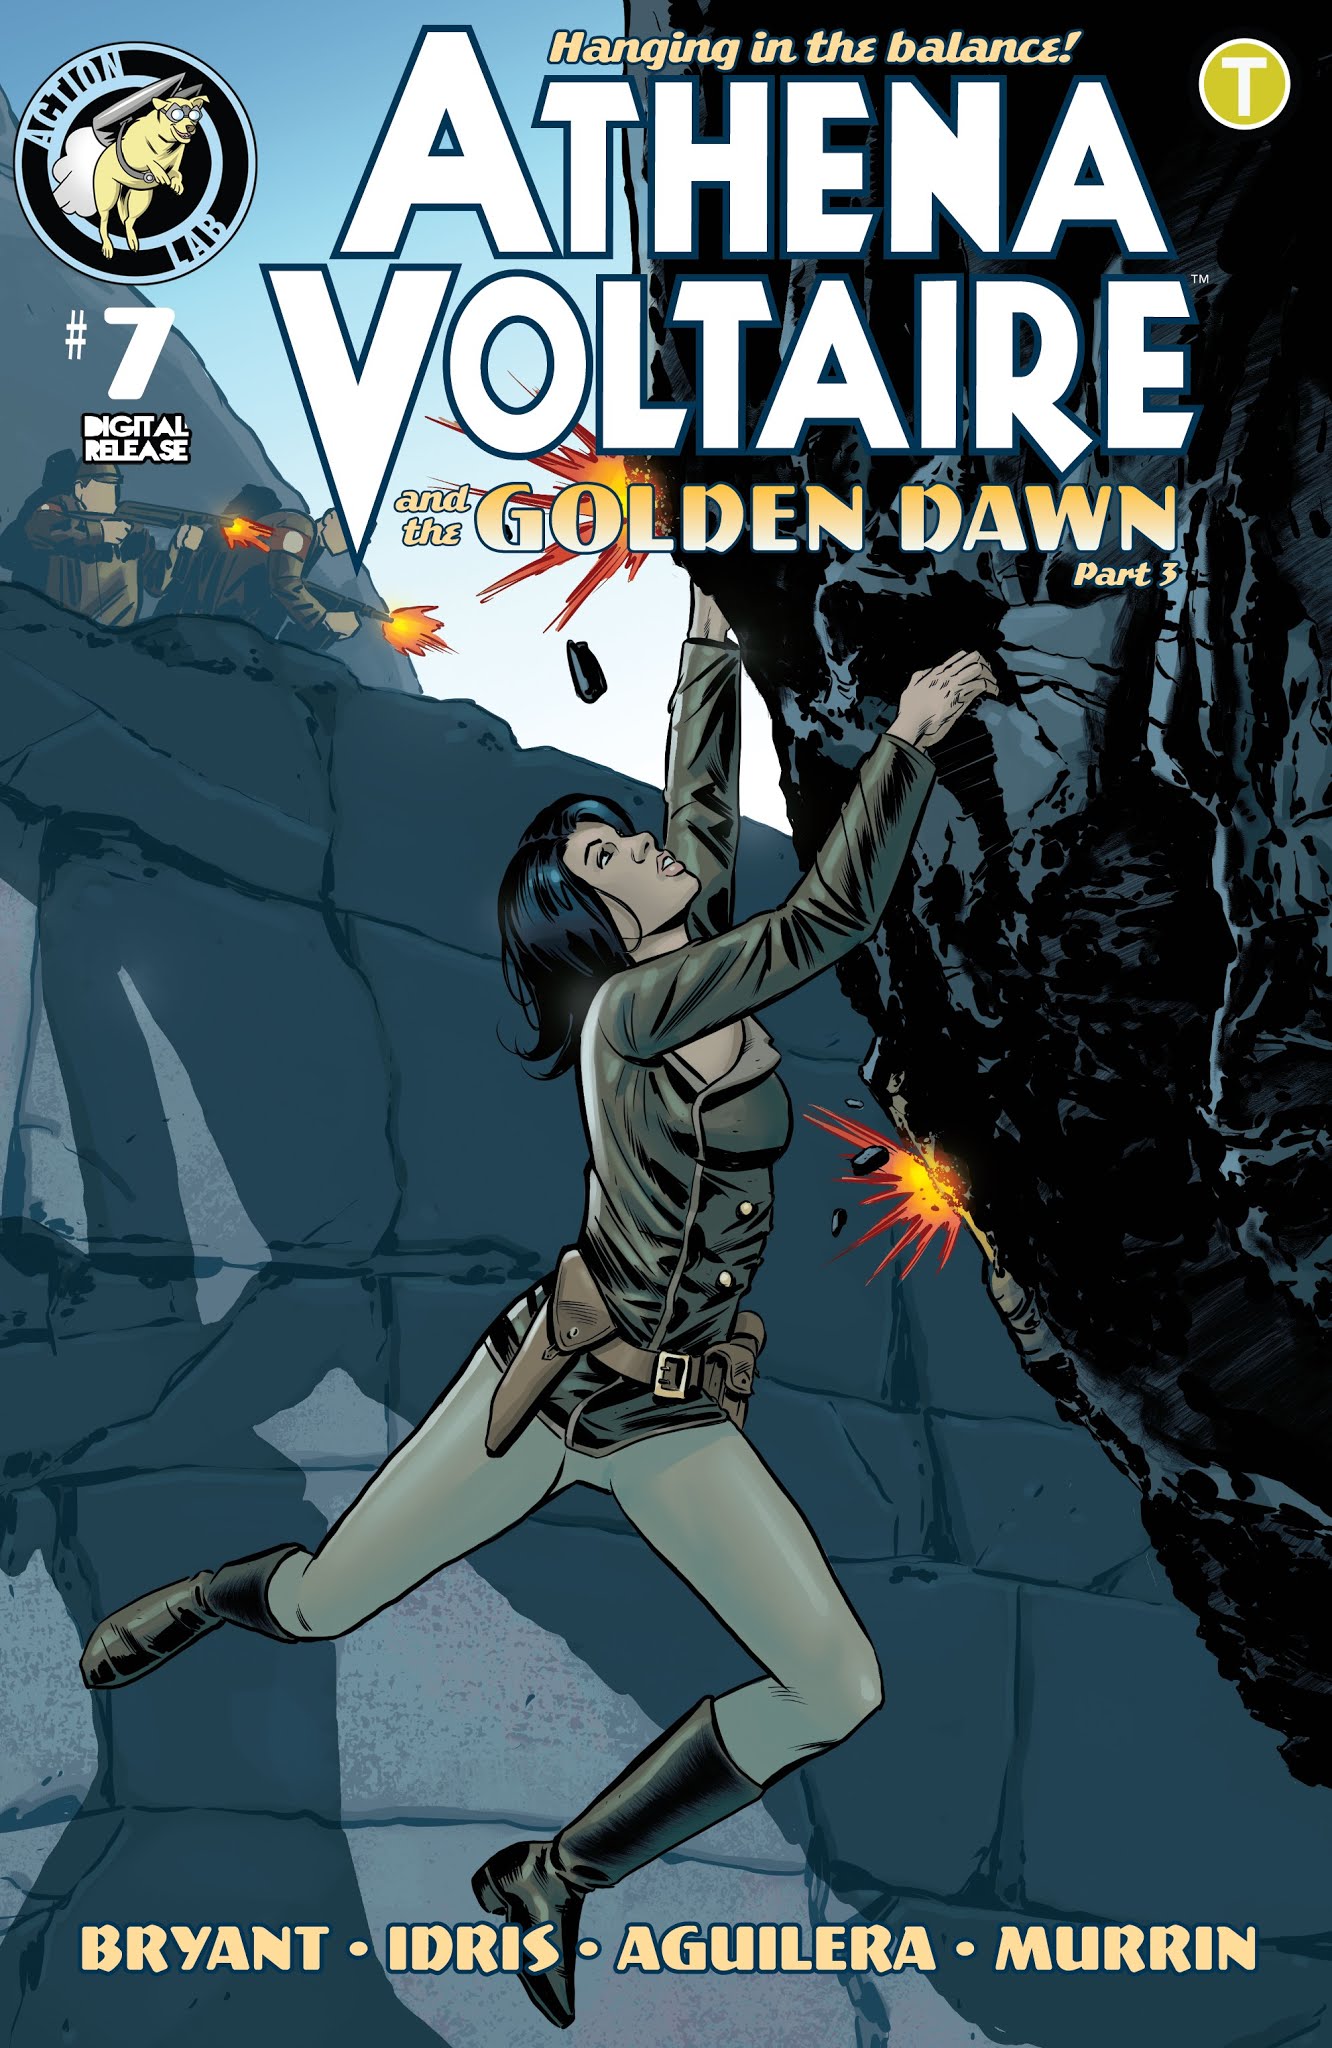 Read online Athena Voltaire comic -  Issue #7 - 1